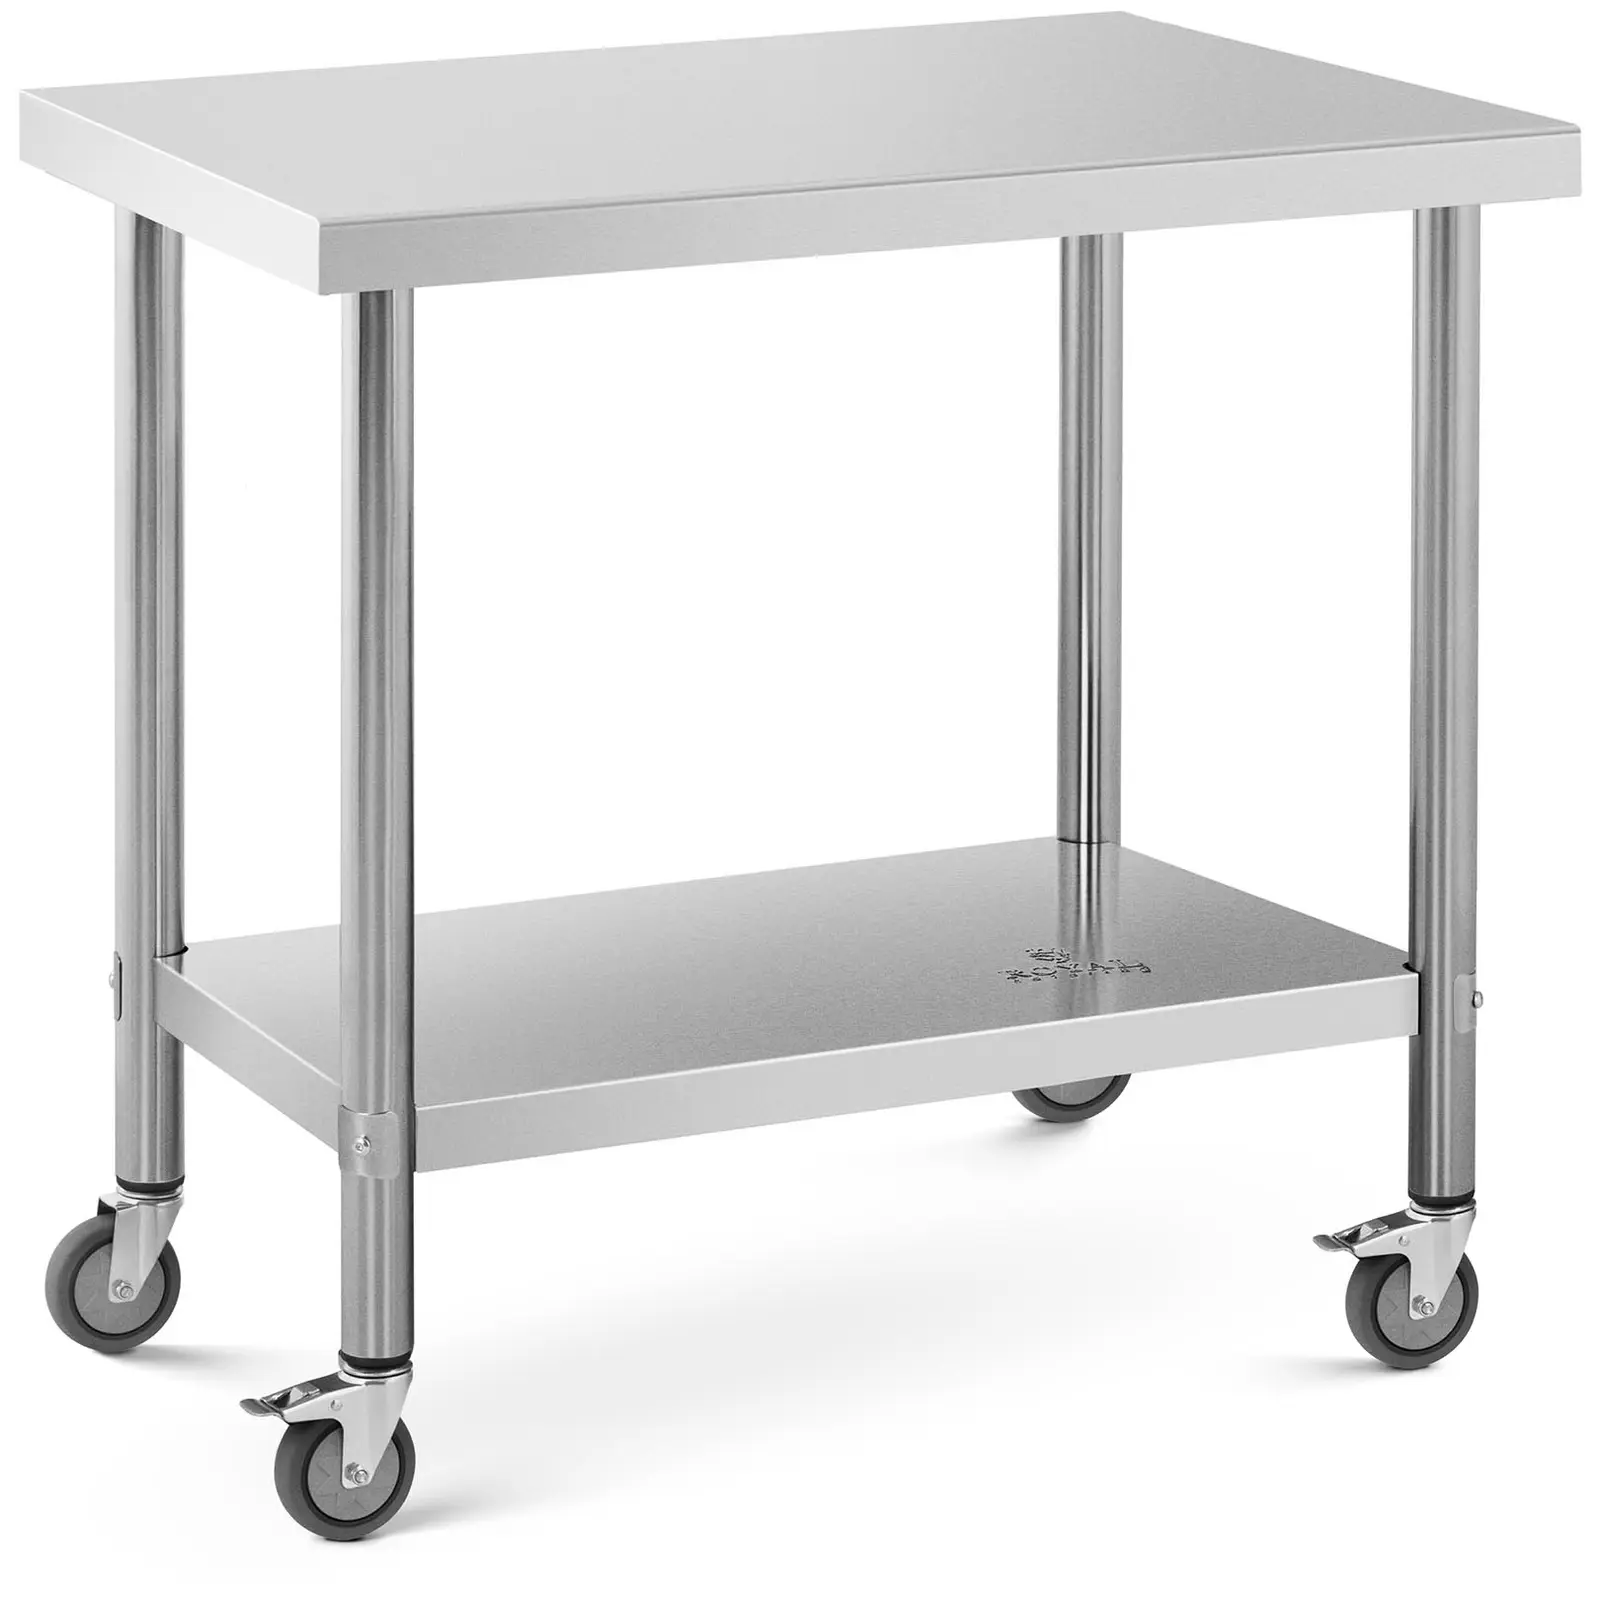 Wheeled work bench - 60 x 90 cm - 145 kg load capacity - Royal Catering